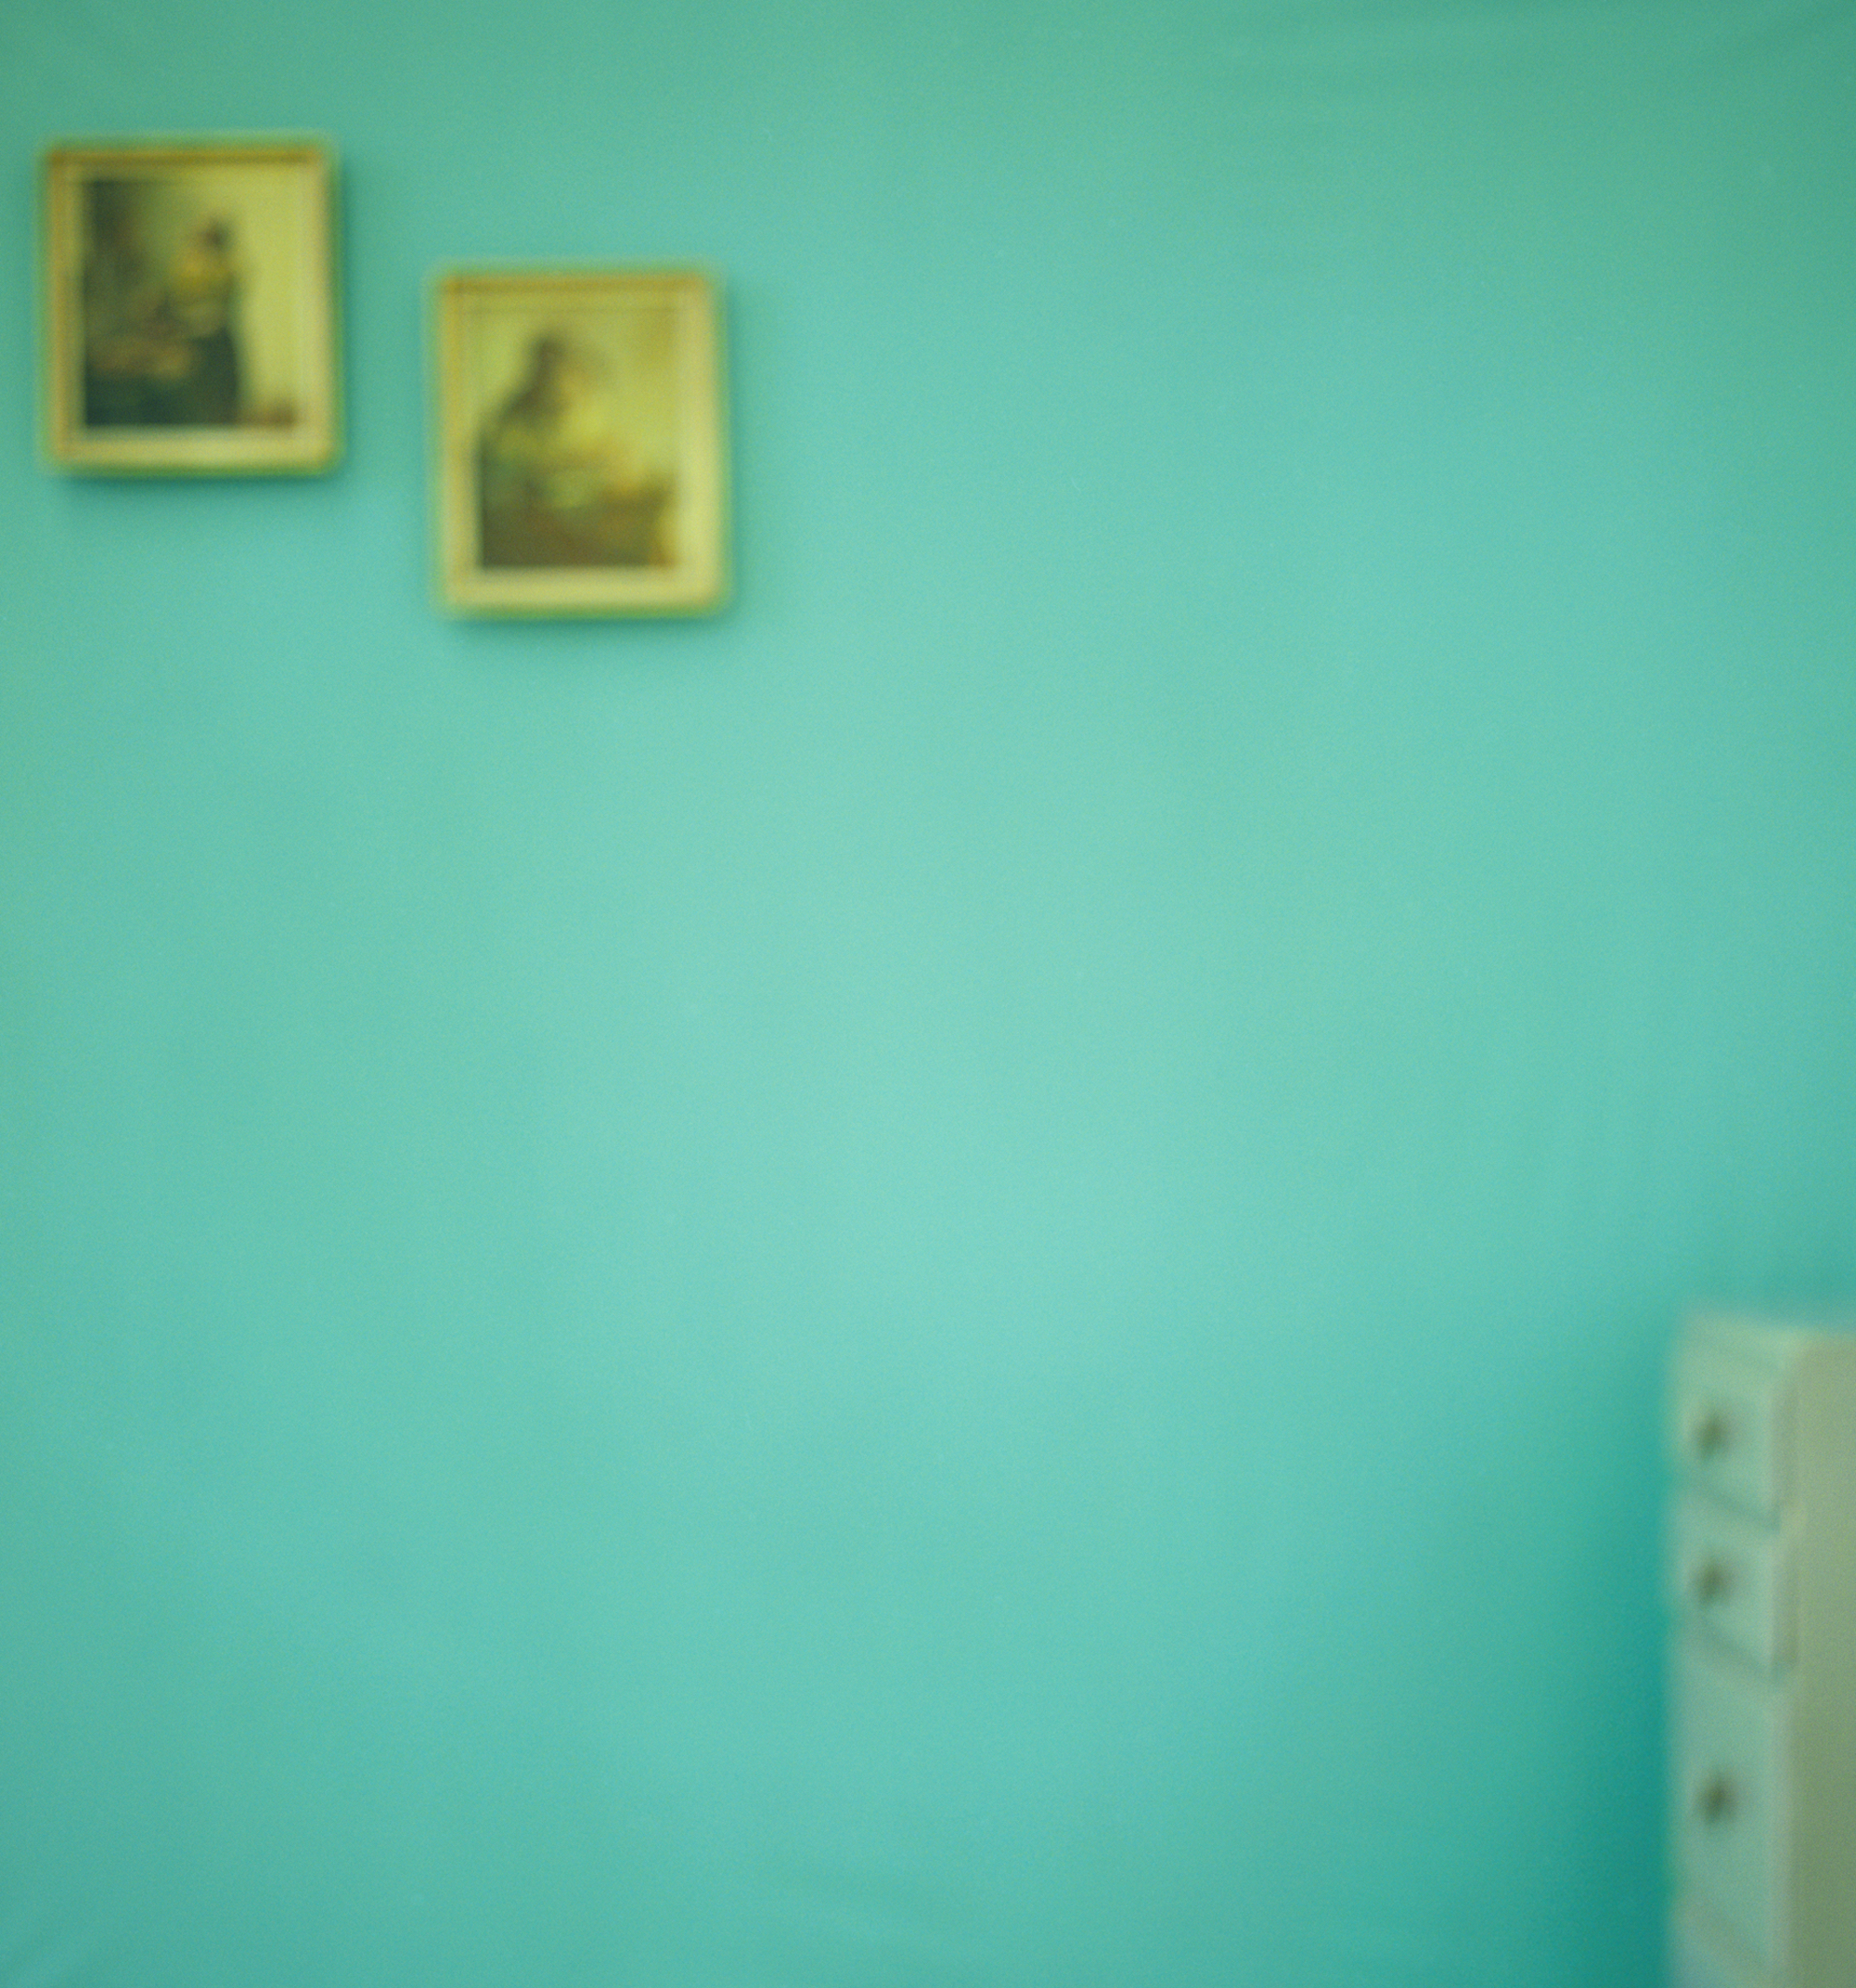 a photograph by Uta Barth showing a blurry greenish wall with two reproductions of Vermeer hanging on it and a small white dresser to the right